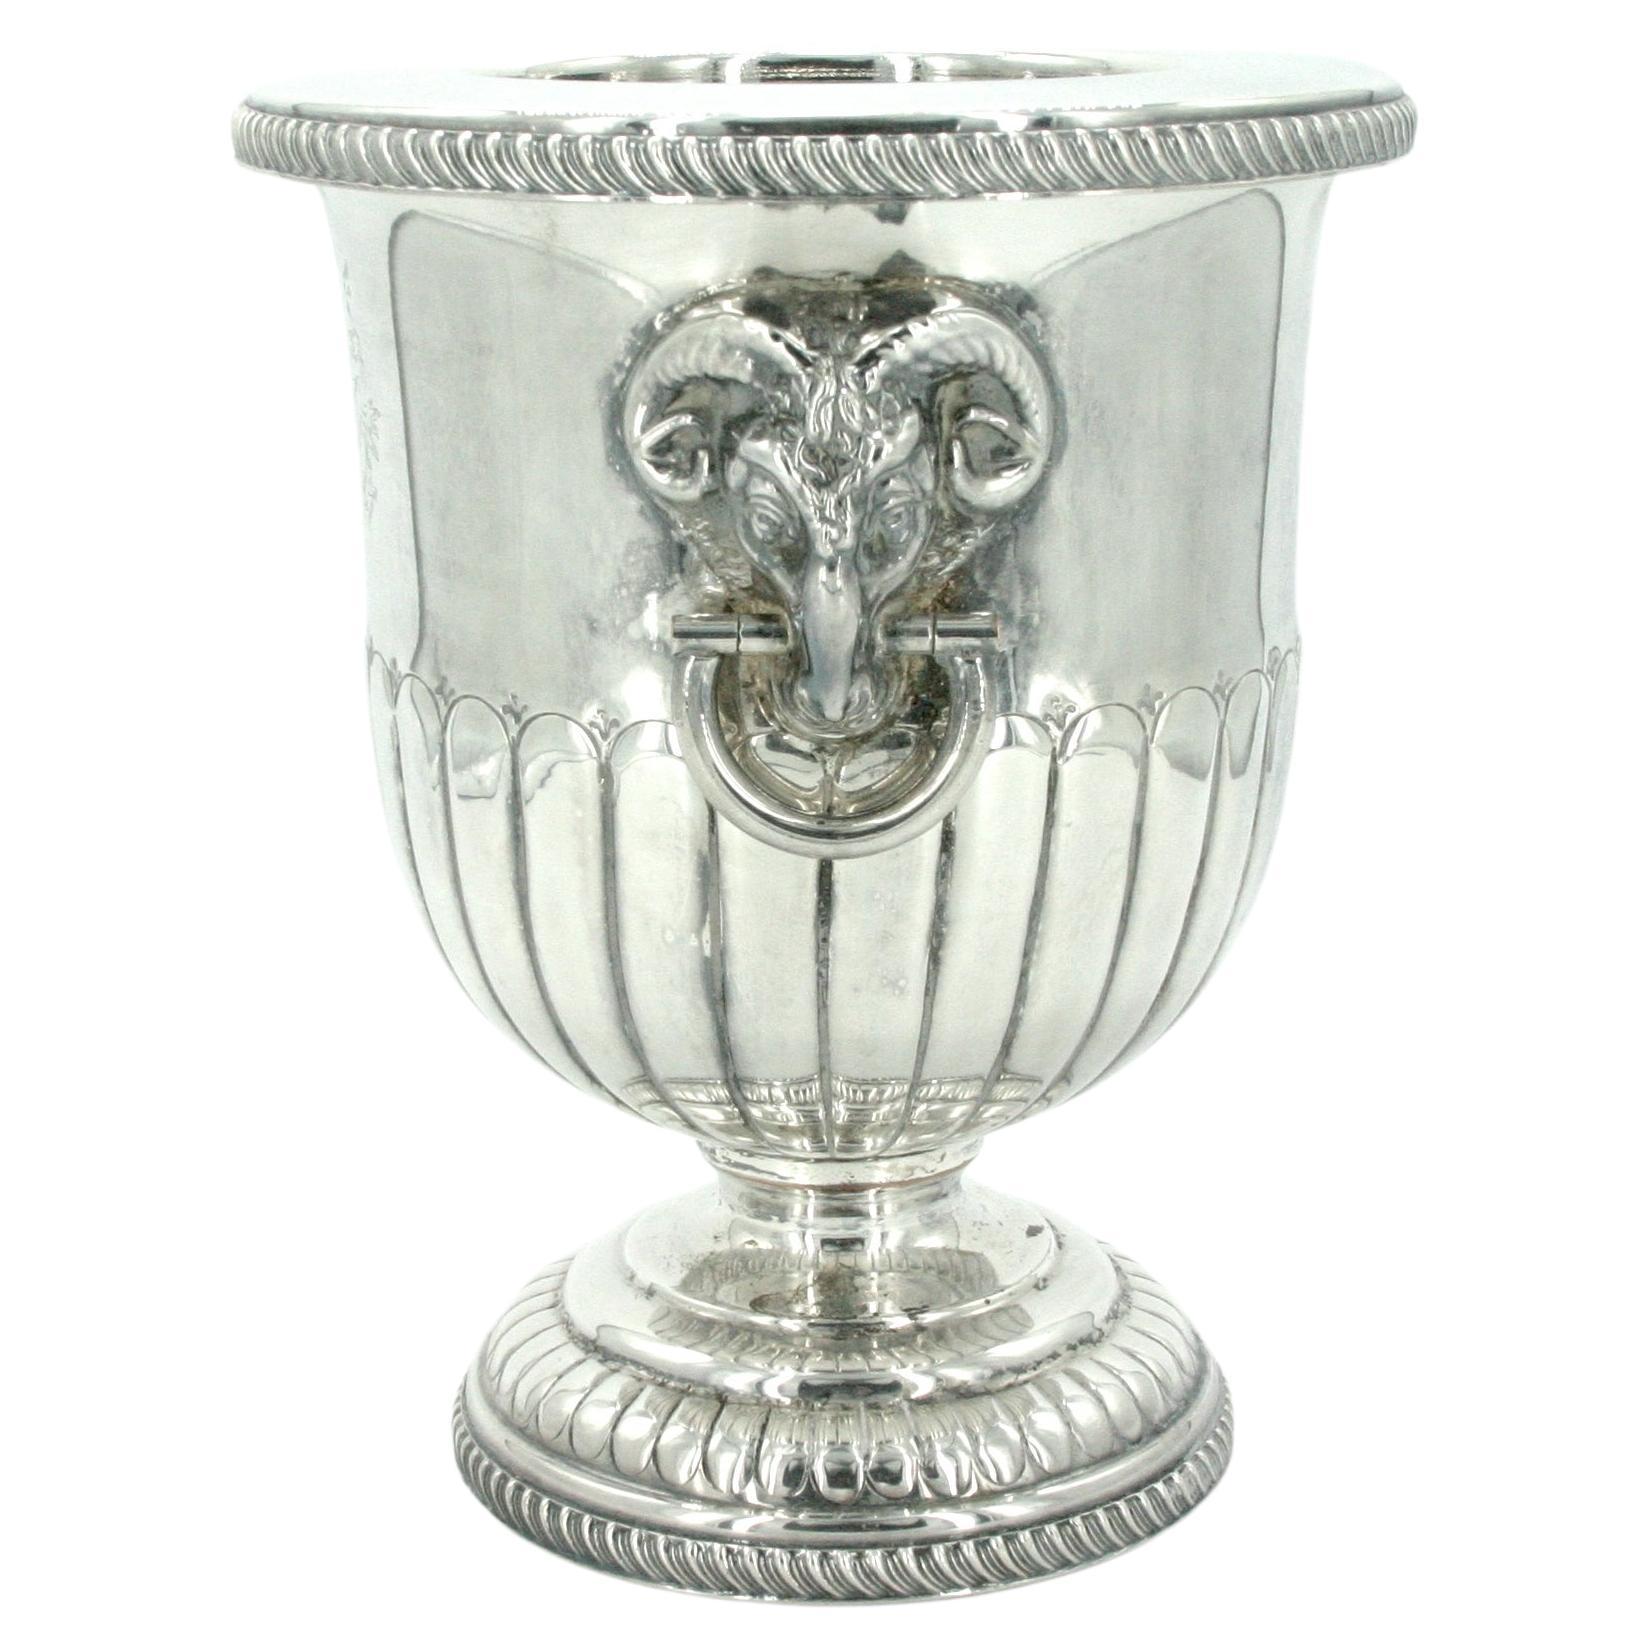 Old English Sheffield silver plate Regency style wine cooler / ice bucket .This exceptional Regency cooler retains the original detachable support frames, liners and push fit cover in a campana shape . It is made of silver on copper and fitted with